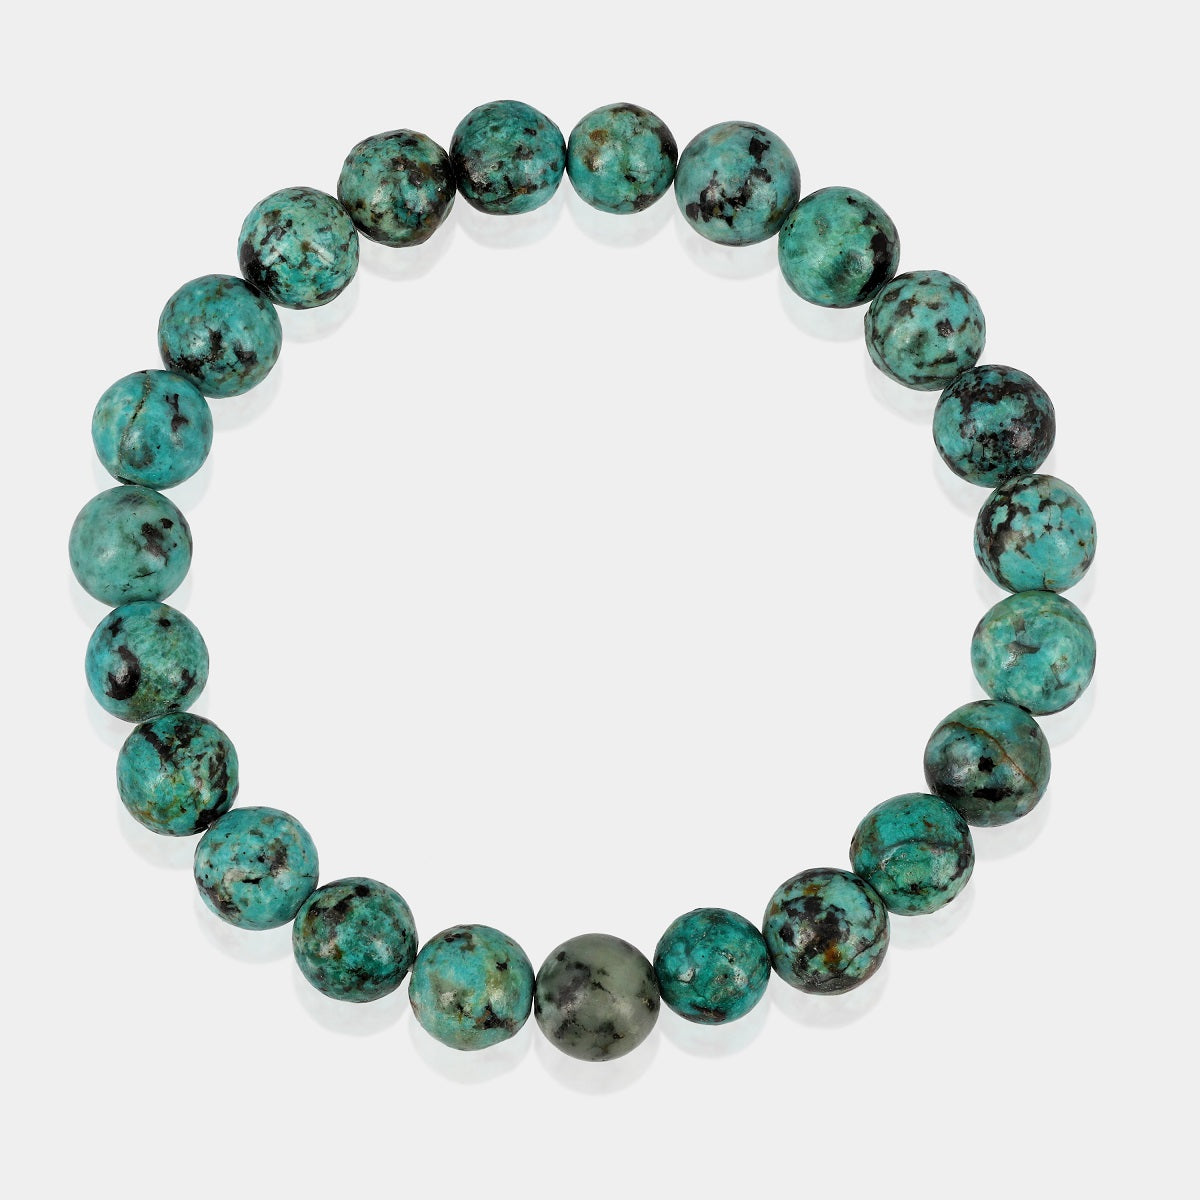 Symbolic image representing purification, capturing the essence of Turquoise's metaphysical benefits in the Stretch Bracelet